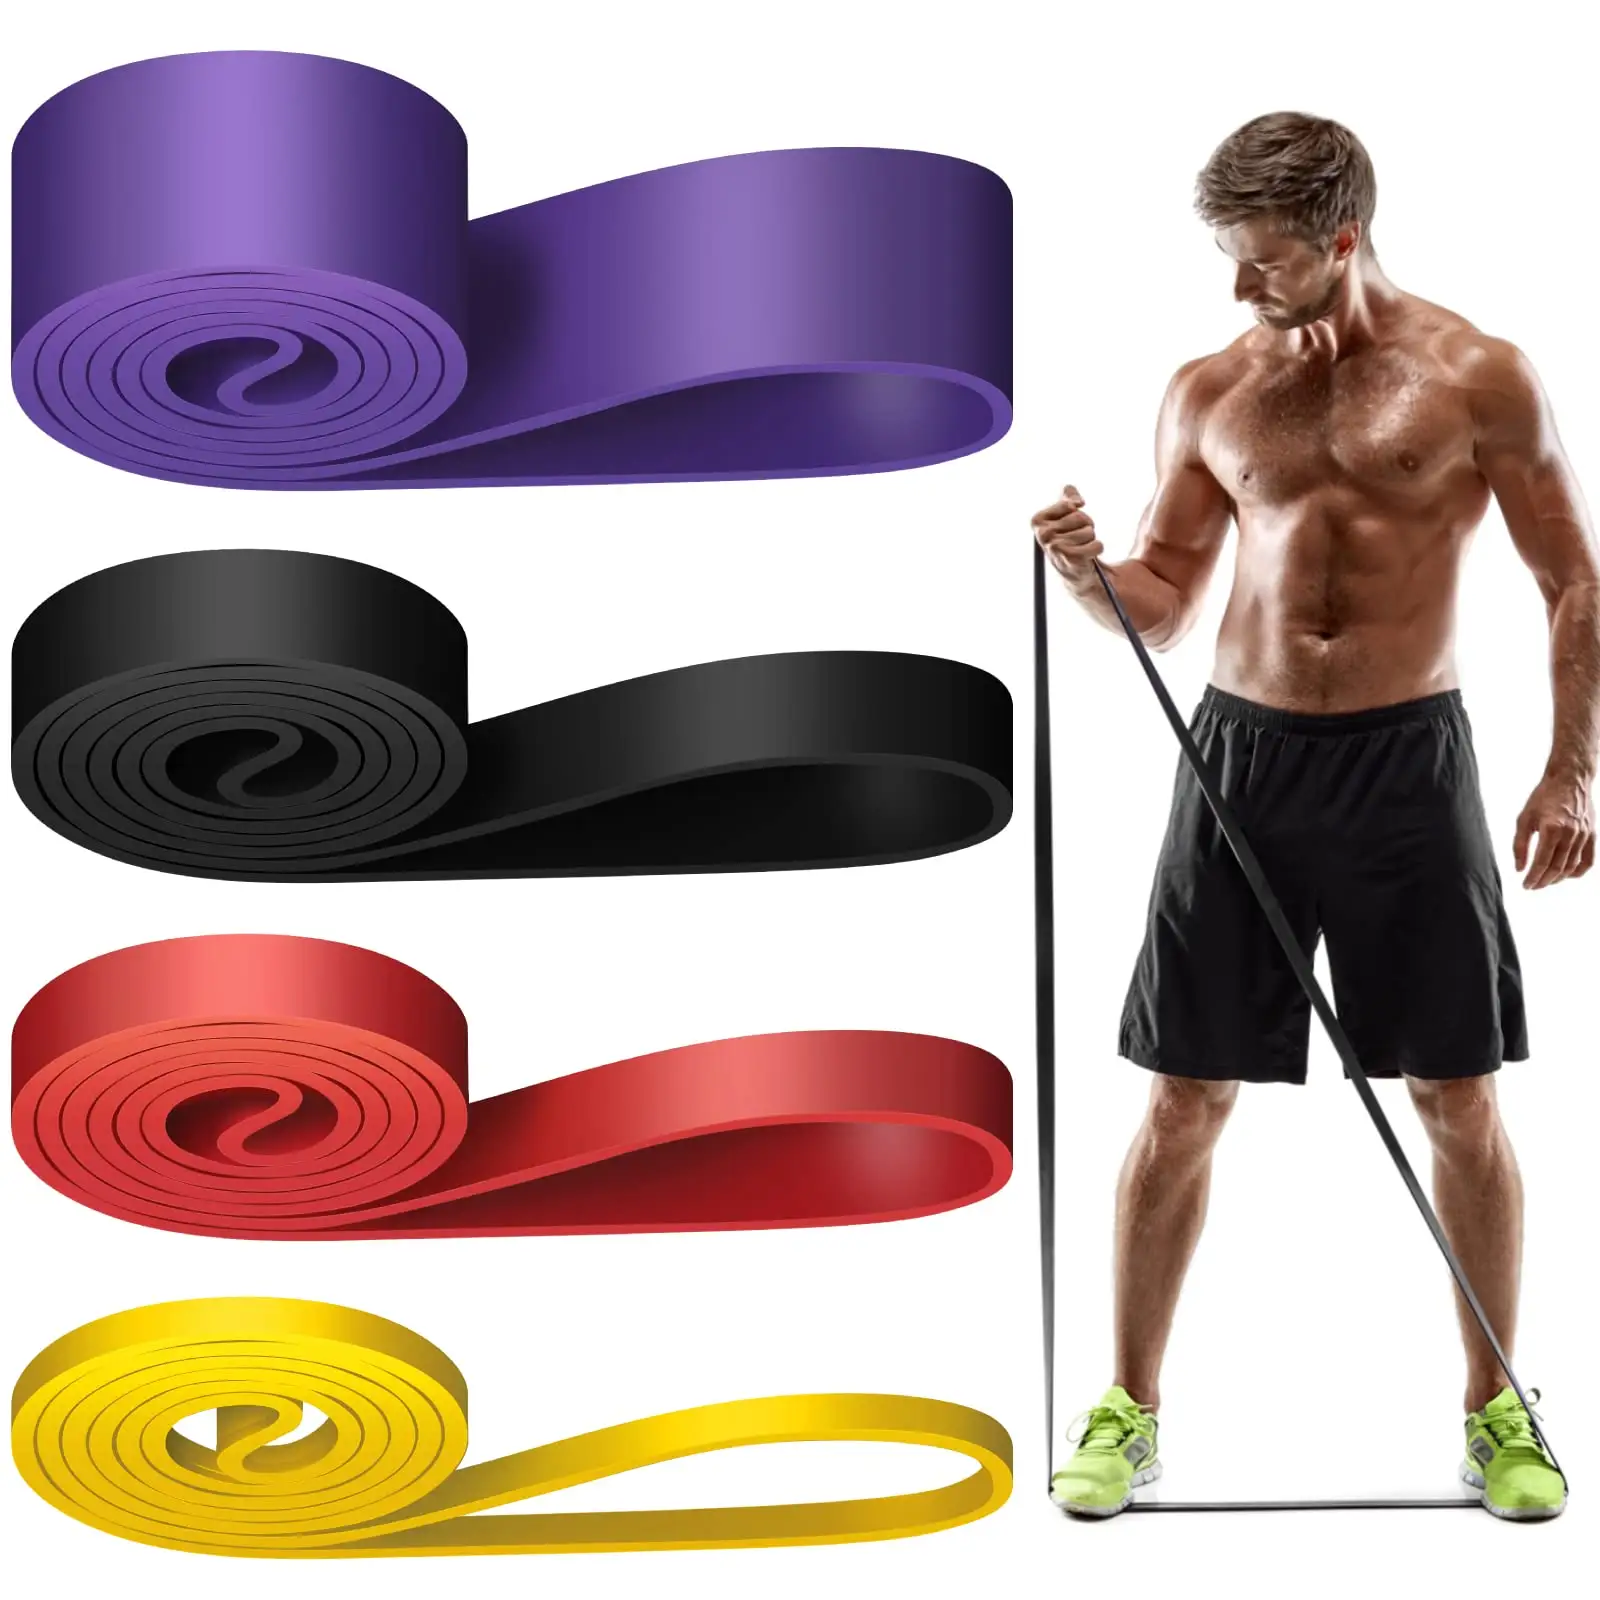 Work out exercise bands pull up assistance bands long strong resistance bands for men